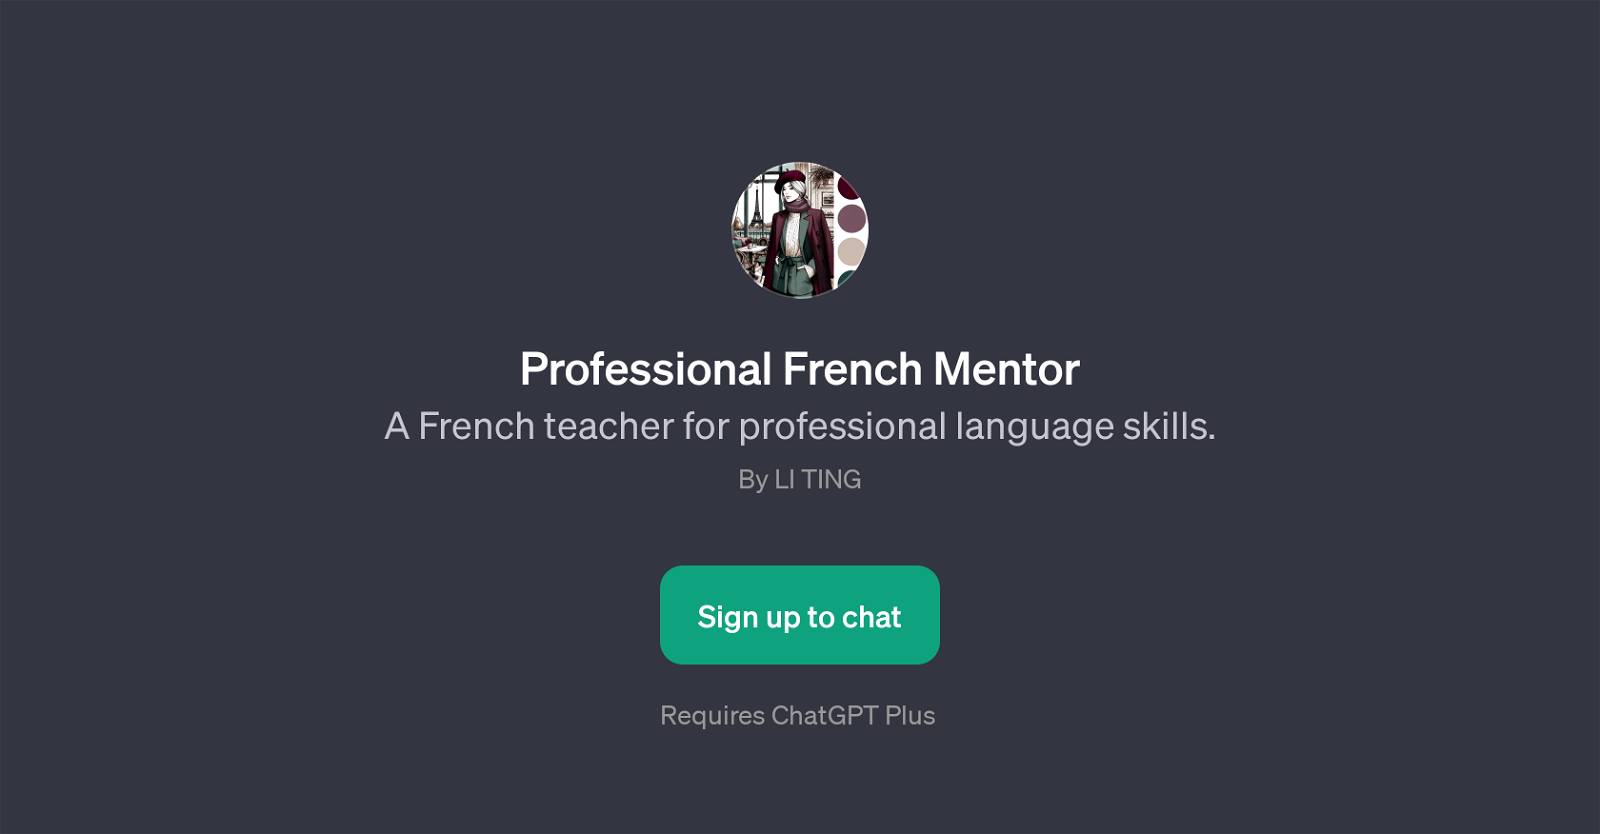 Professional French Mentor website